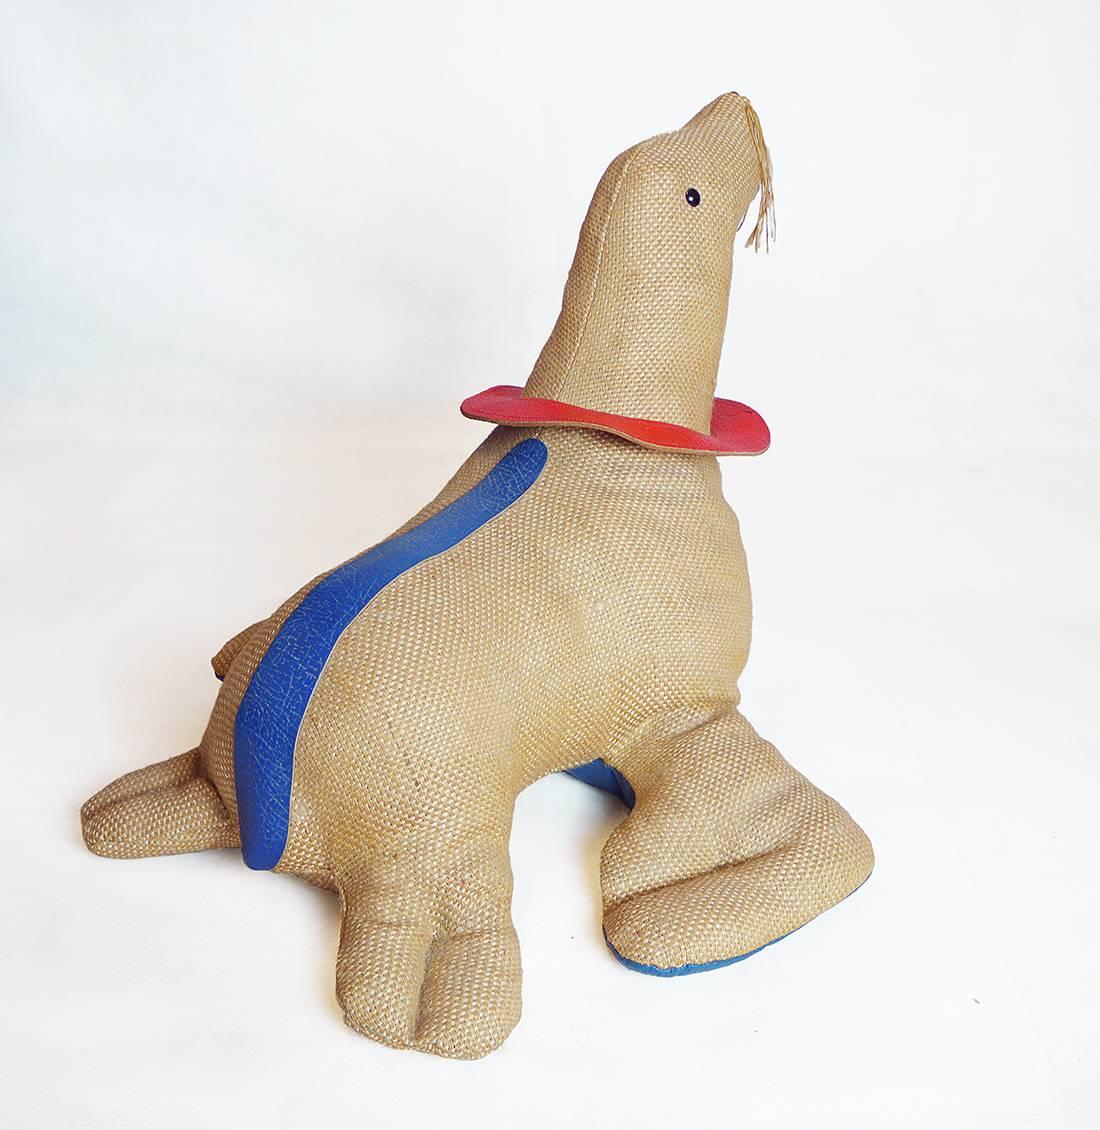 Mid-Century Modern 1971, Germany, Therapeutic Toy Seal by Renate Müller Oversized Stuffed Animal